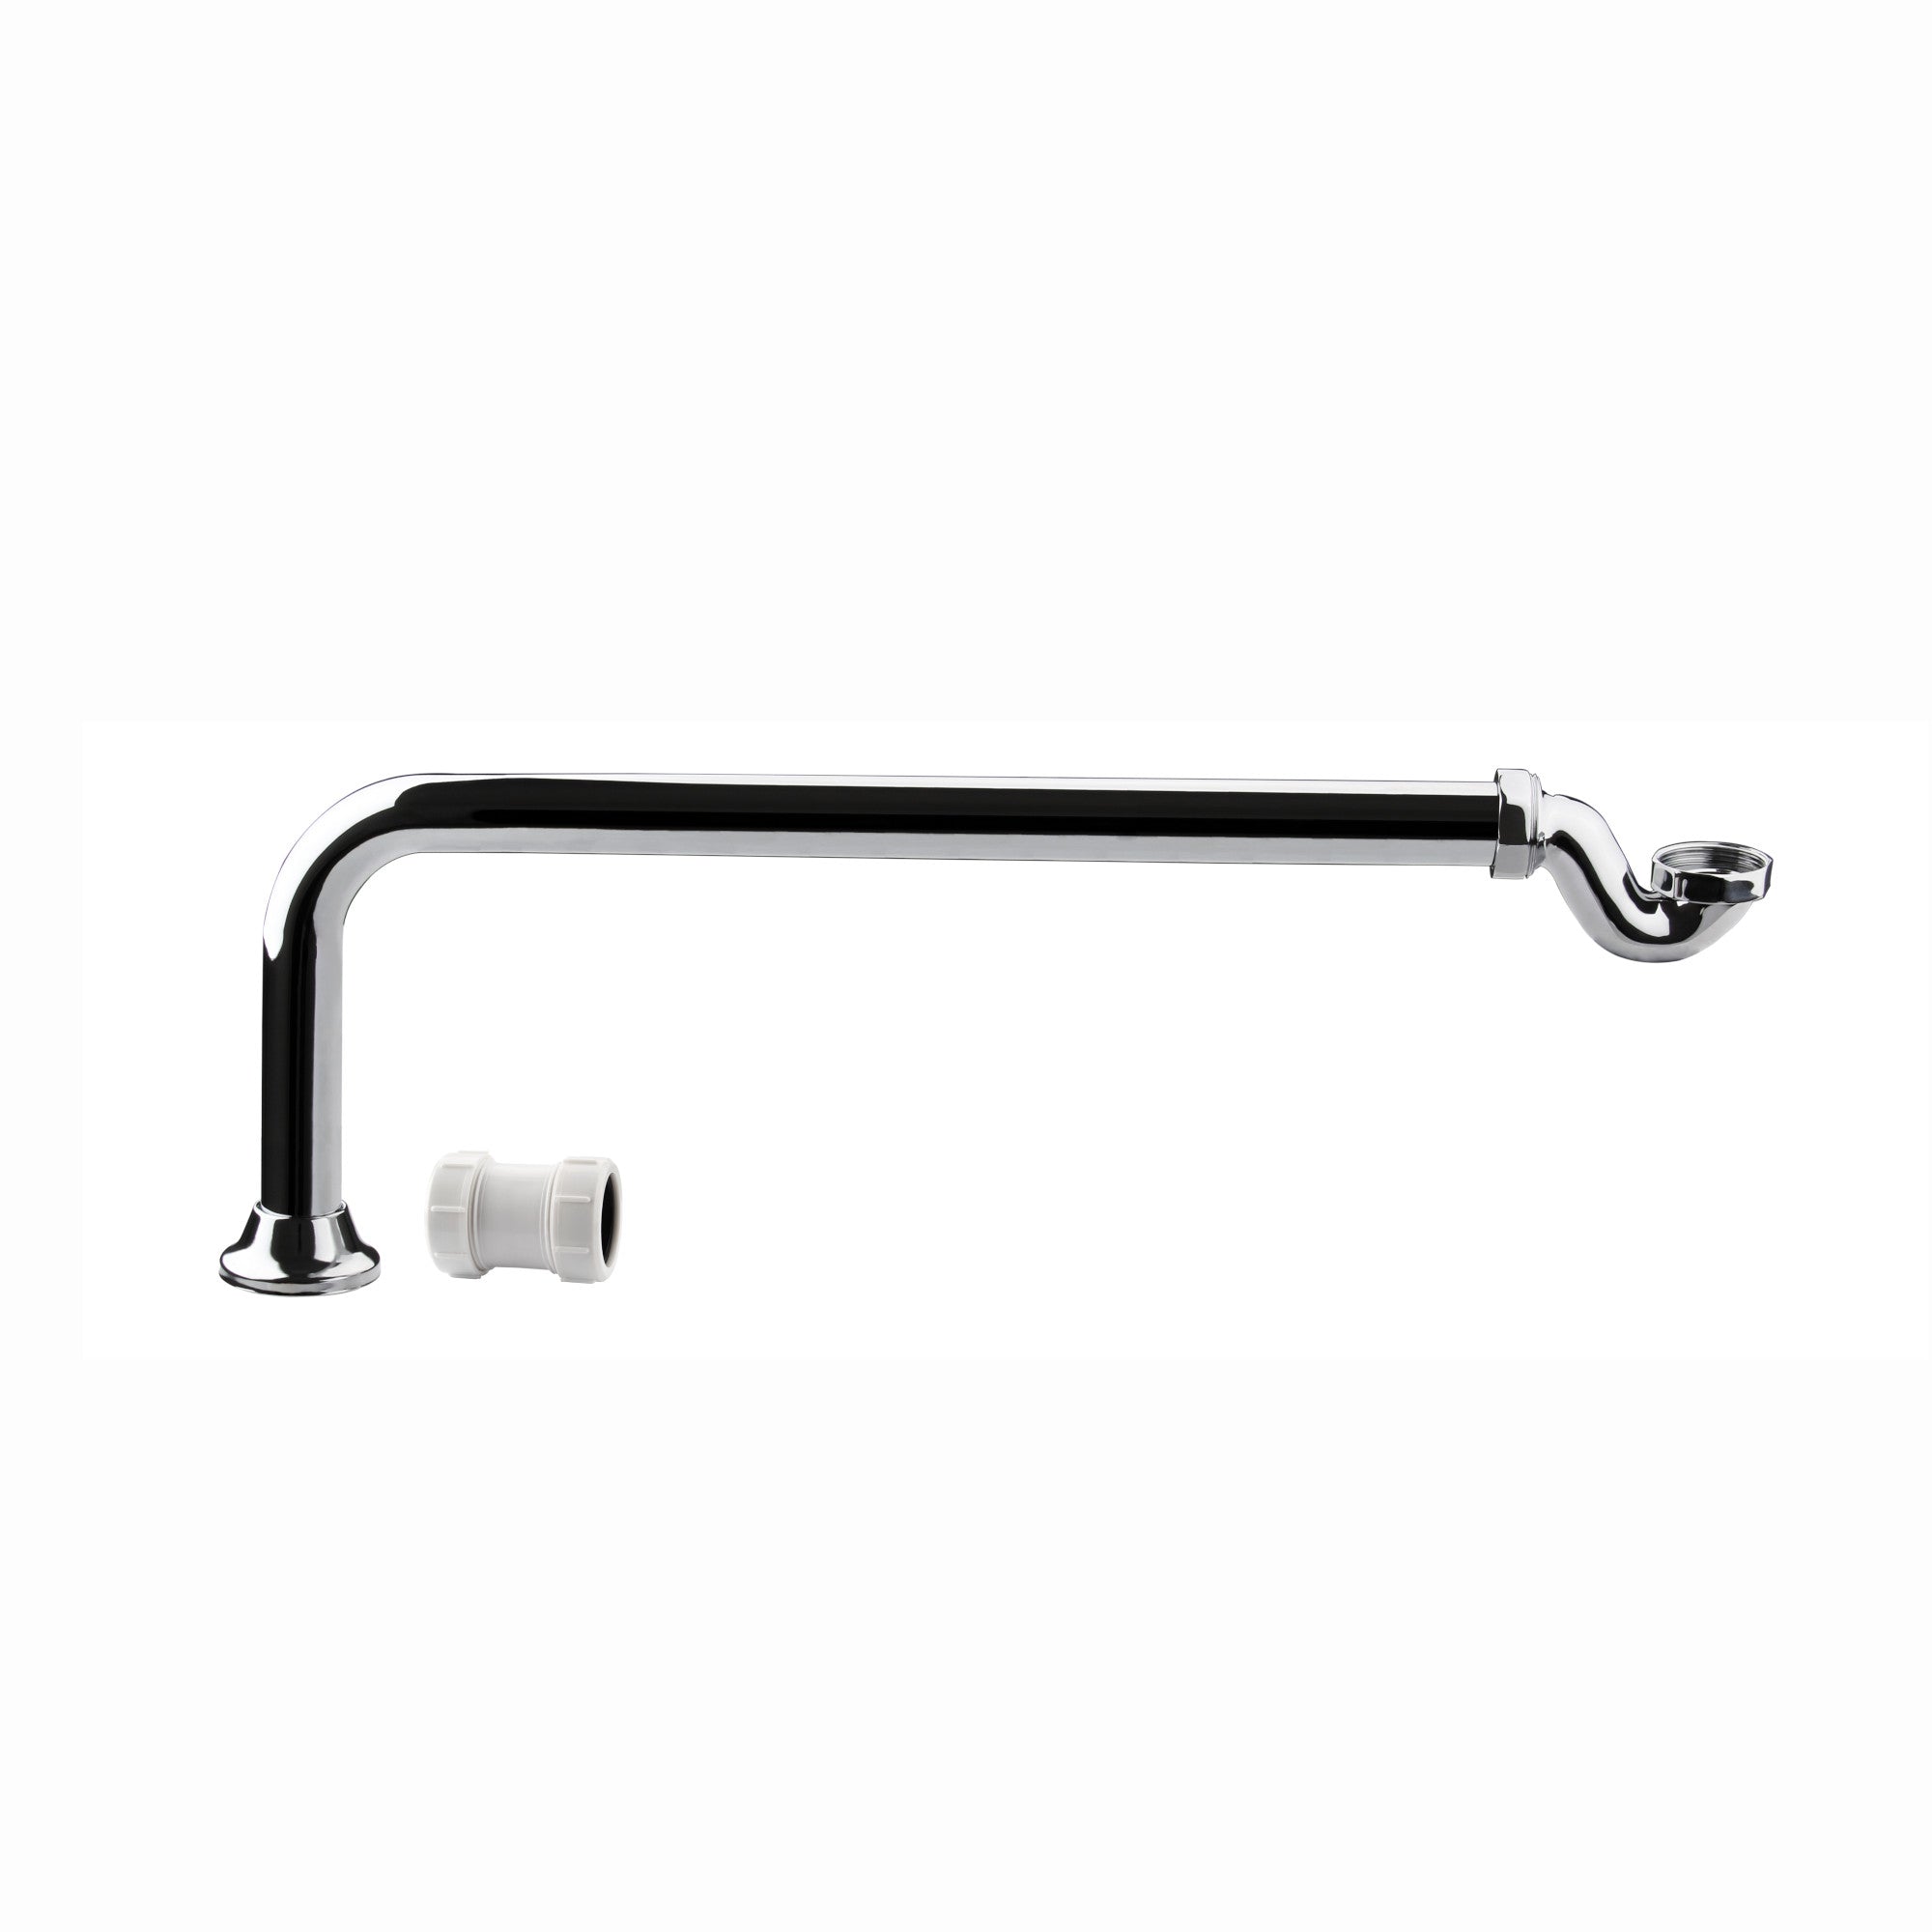 Traditional exposed shallow seal bath trap & pipe - chrome